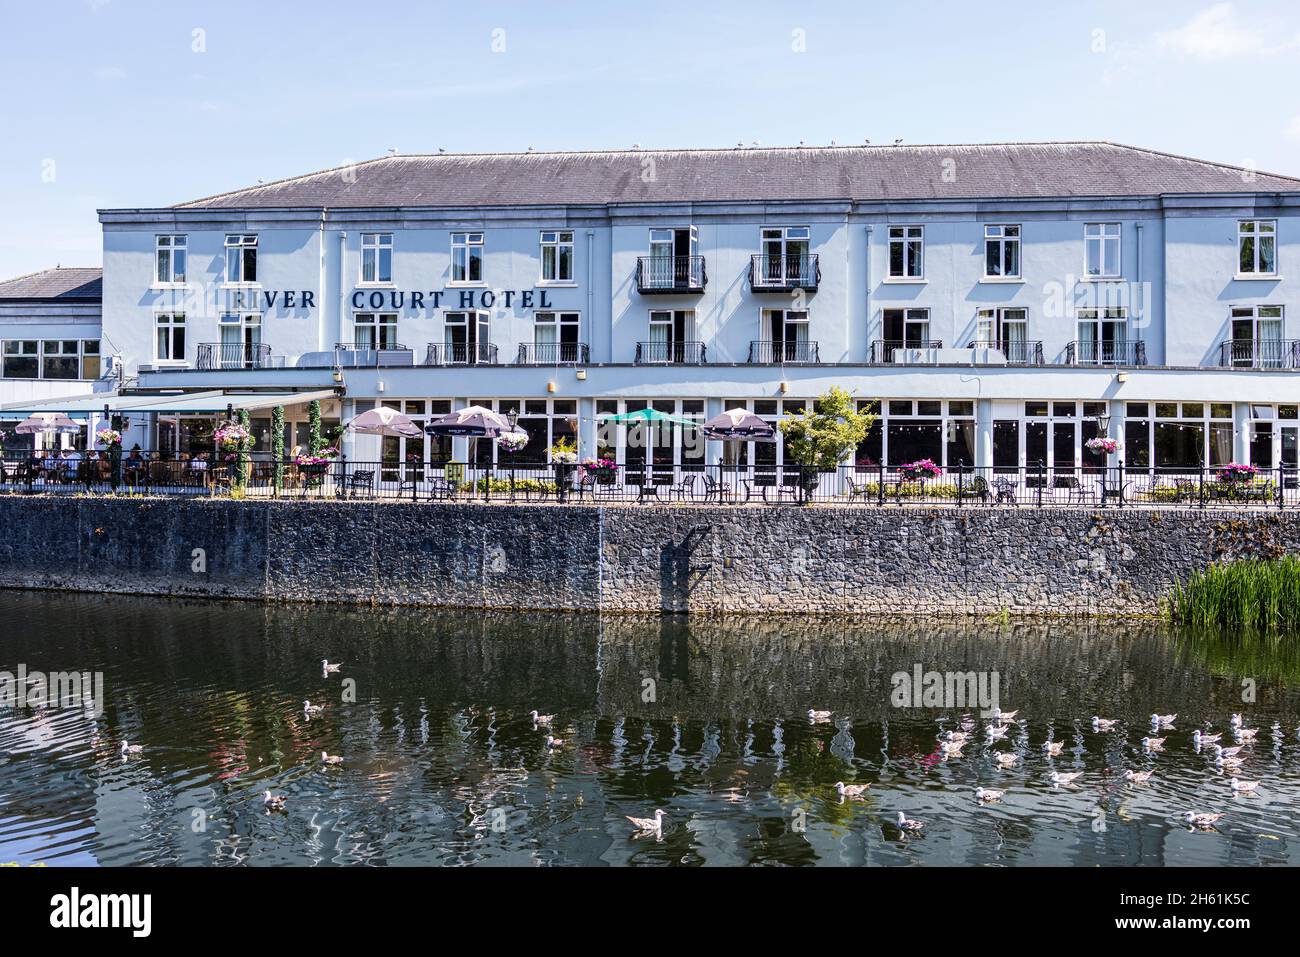 River Court Hotel on the bank of the River Nore in Kilkenny, Ireland Stock Photo